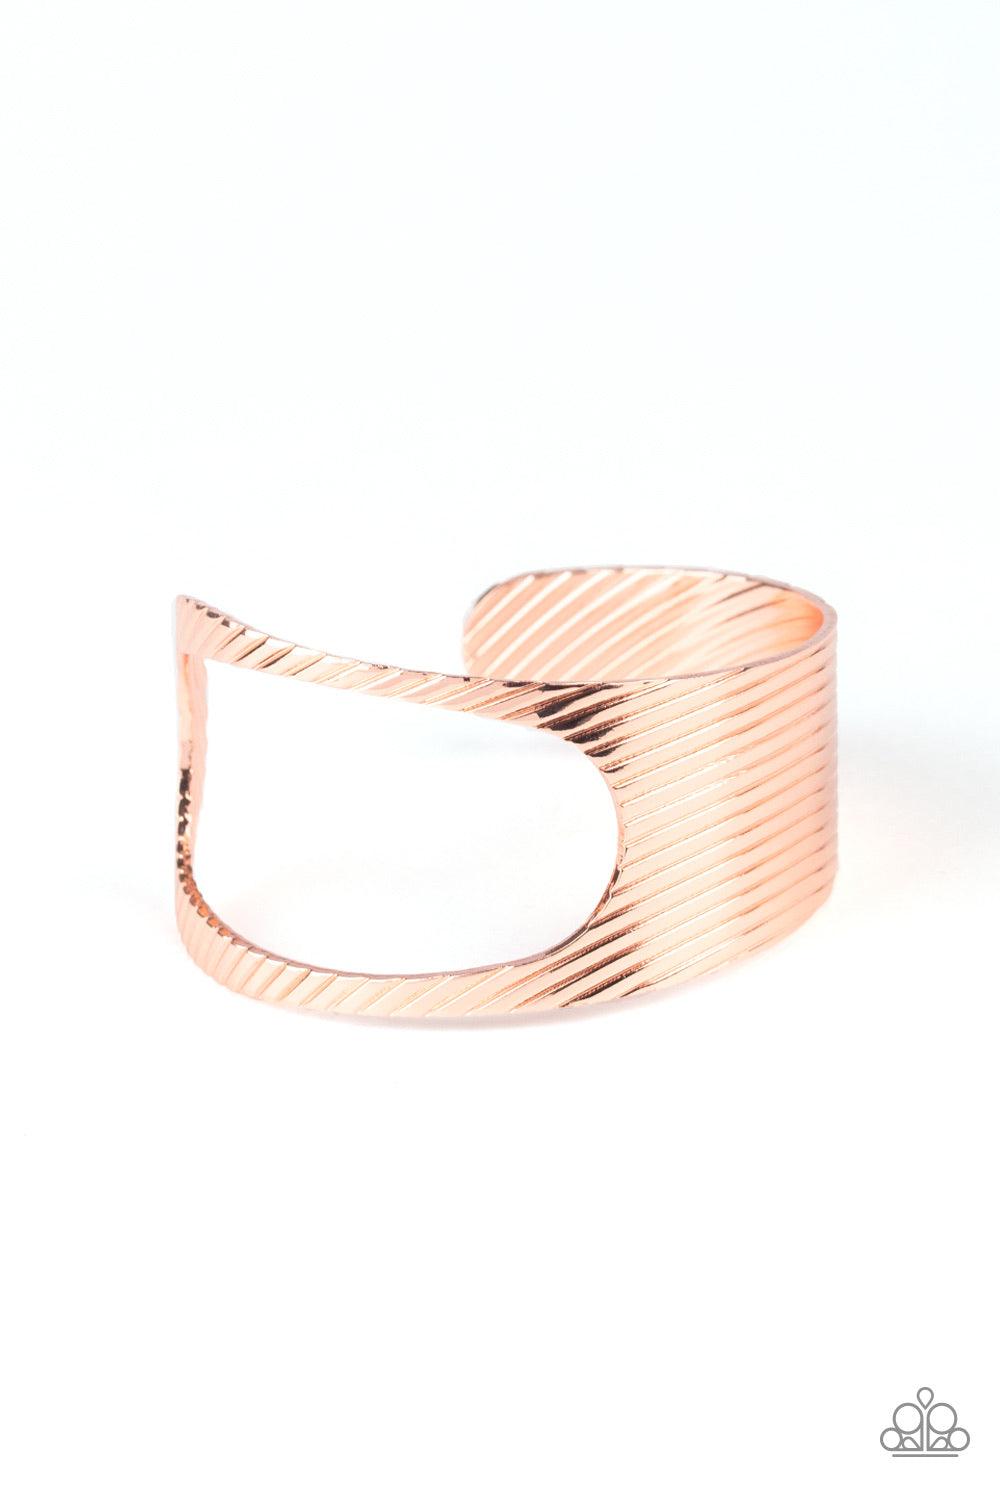 Paparazzi Accessories What GLEAMS Are Made of - Copper Stamped in a slanted linear pattern, a shiny copper cuff featuring an airy asymmetrical cutout wraps around the cuff for a bold industrial look. Bracelets